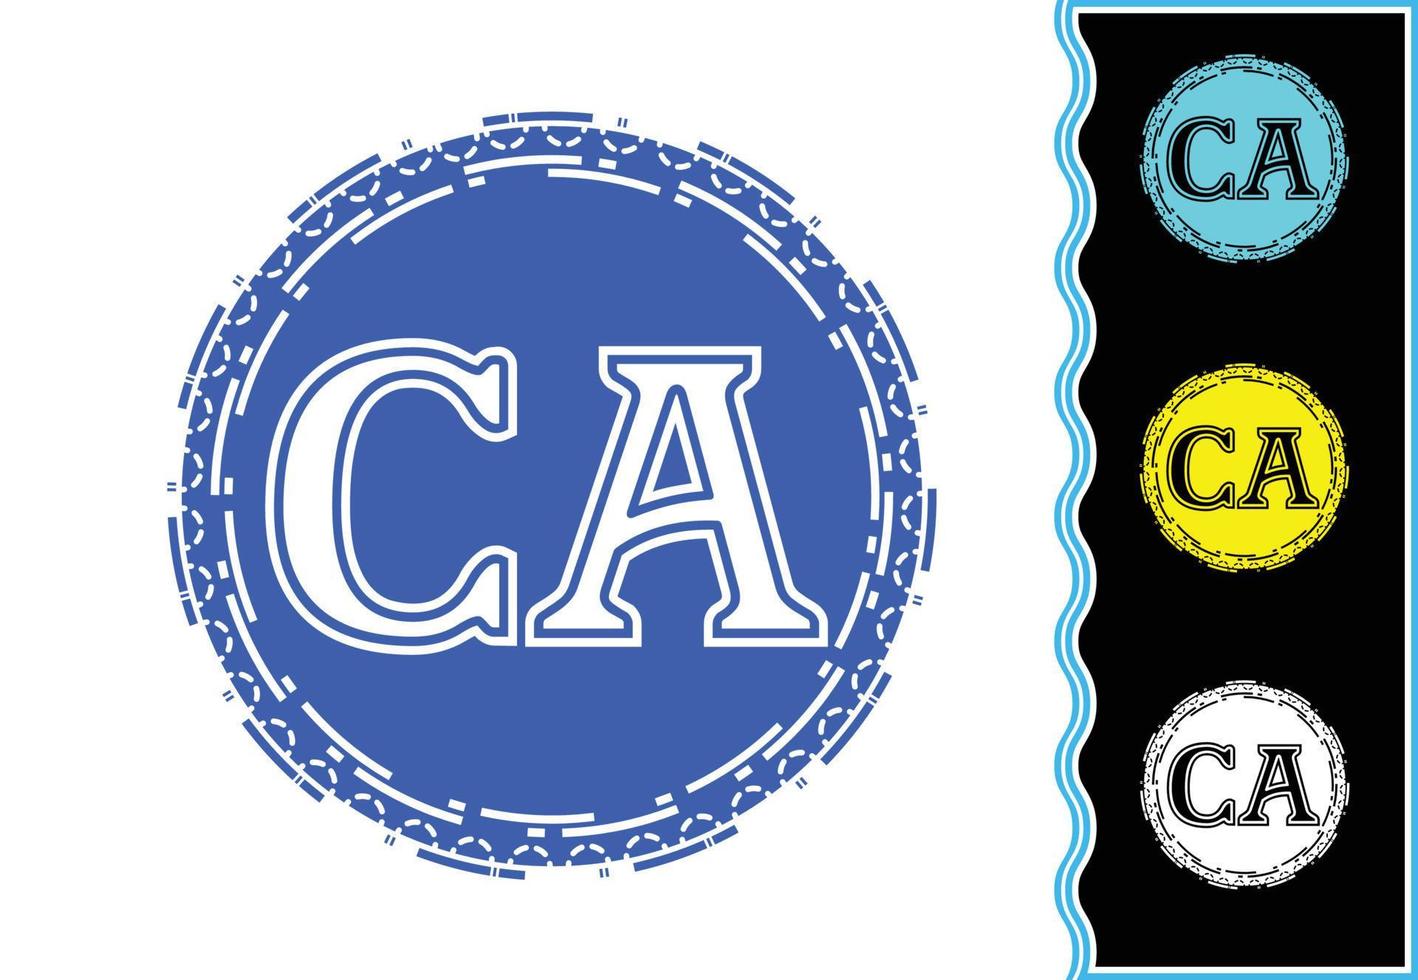 CA letter new logo and icon design template vector